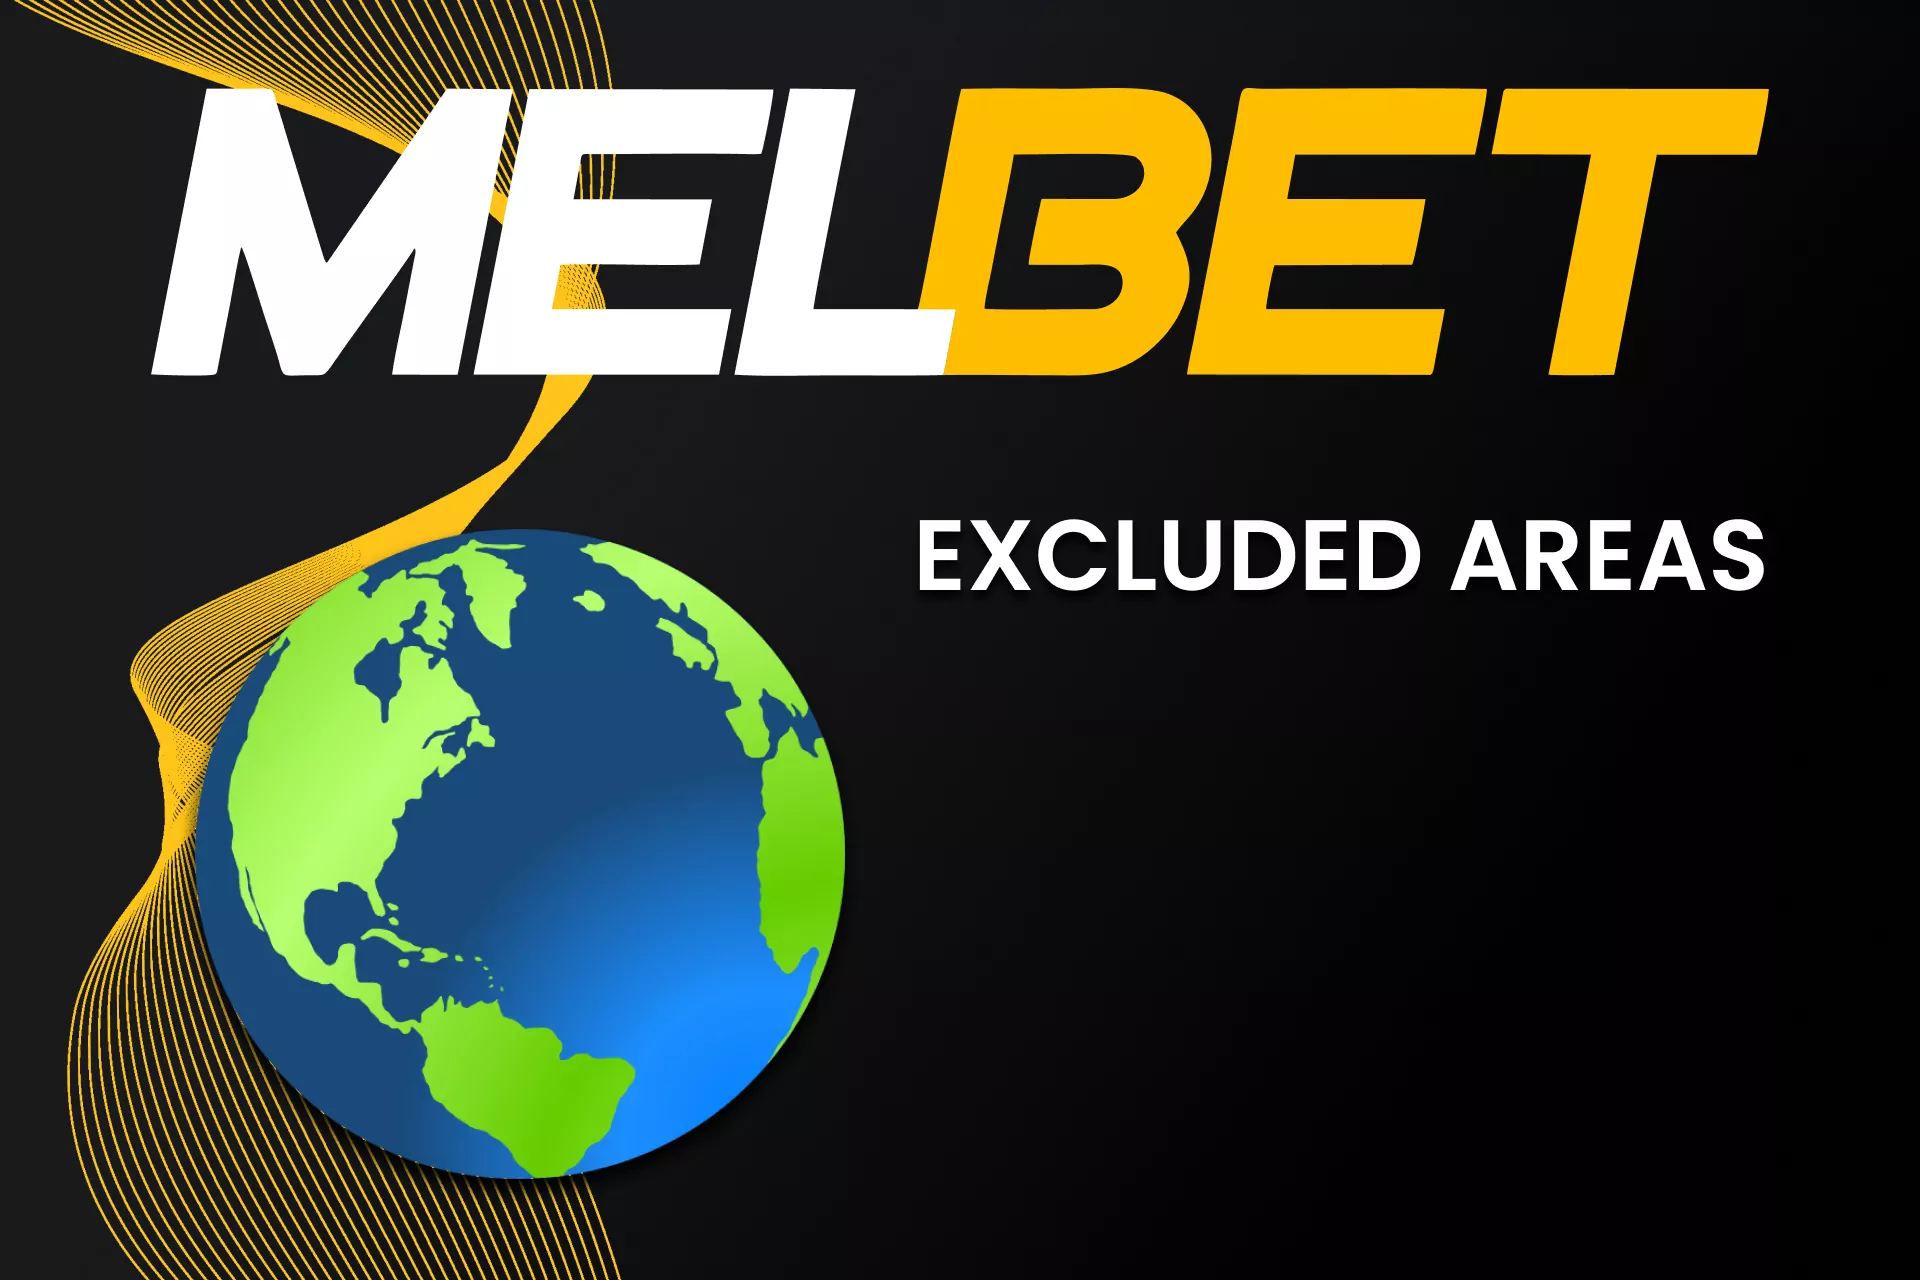 Find out about the countries prohibited for the Melbet service.